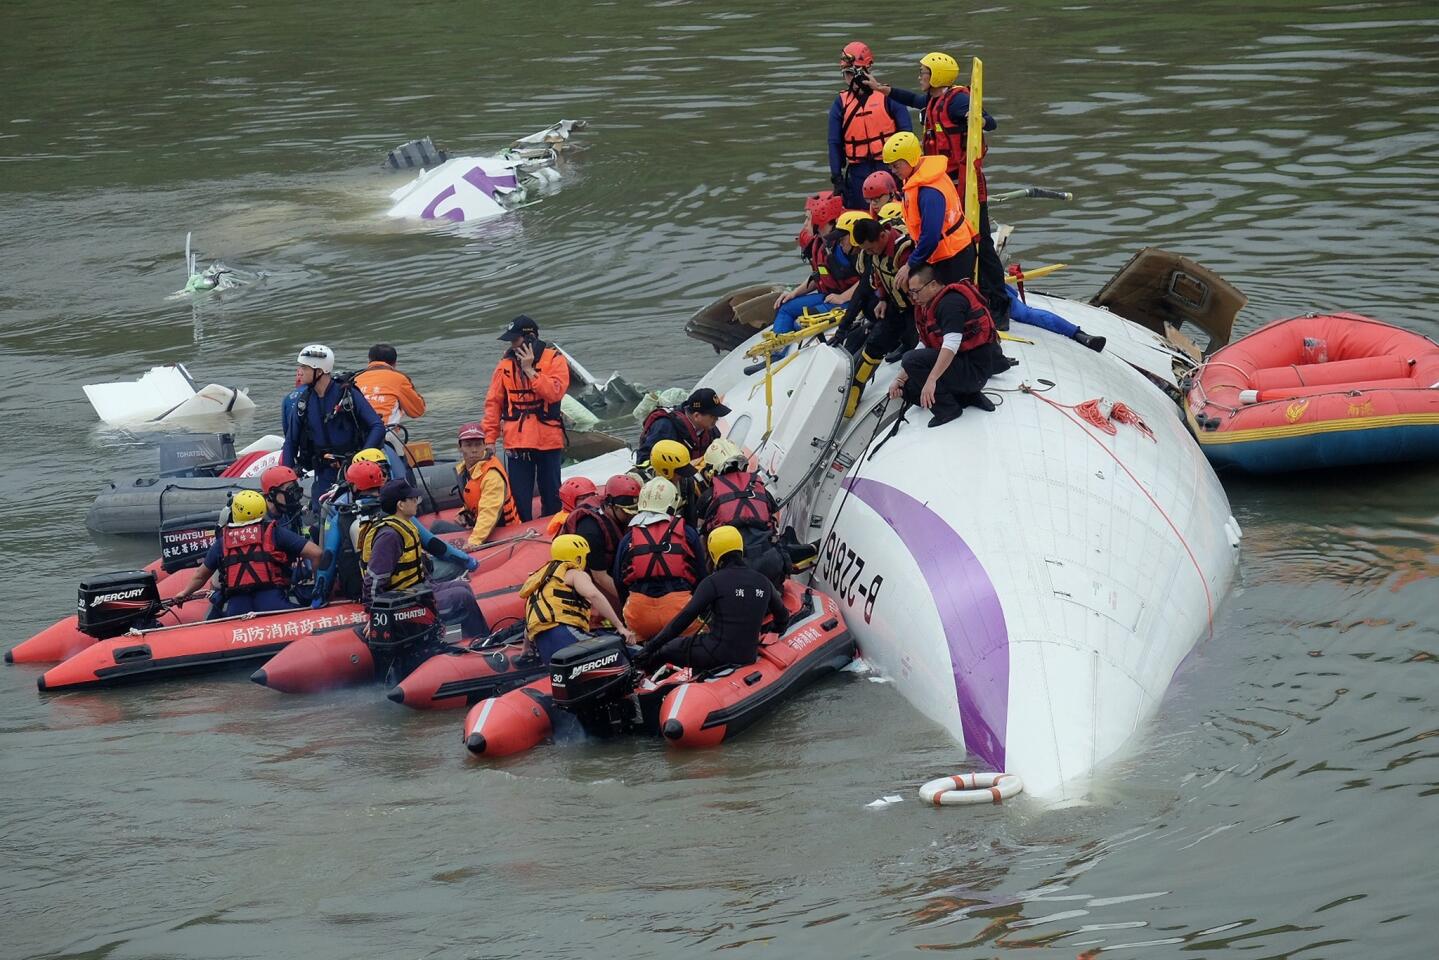 Rescue personnel work to free passengers from a TransAsia ATR 72-600 turboprop plane that crash-landed into a river outside Taiwan's capital, Taipei.